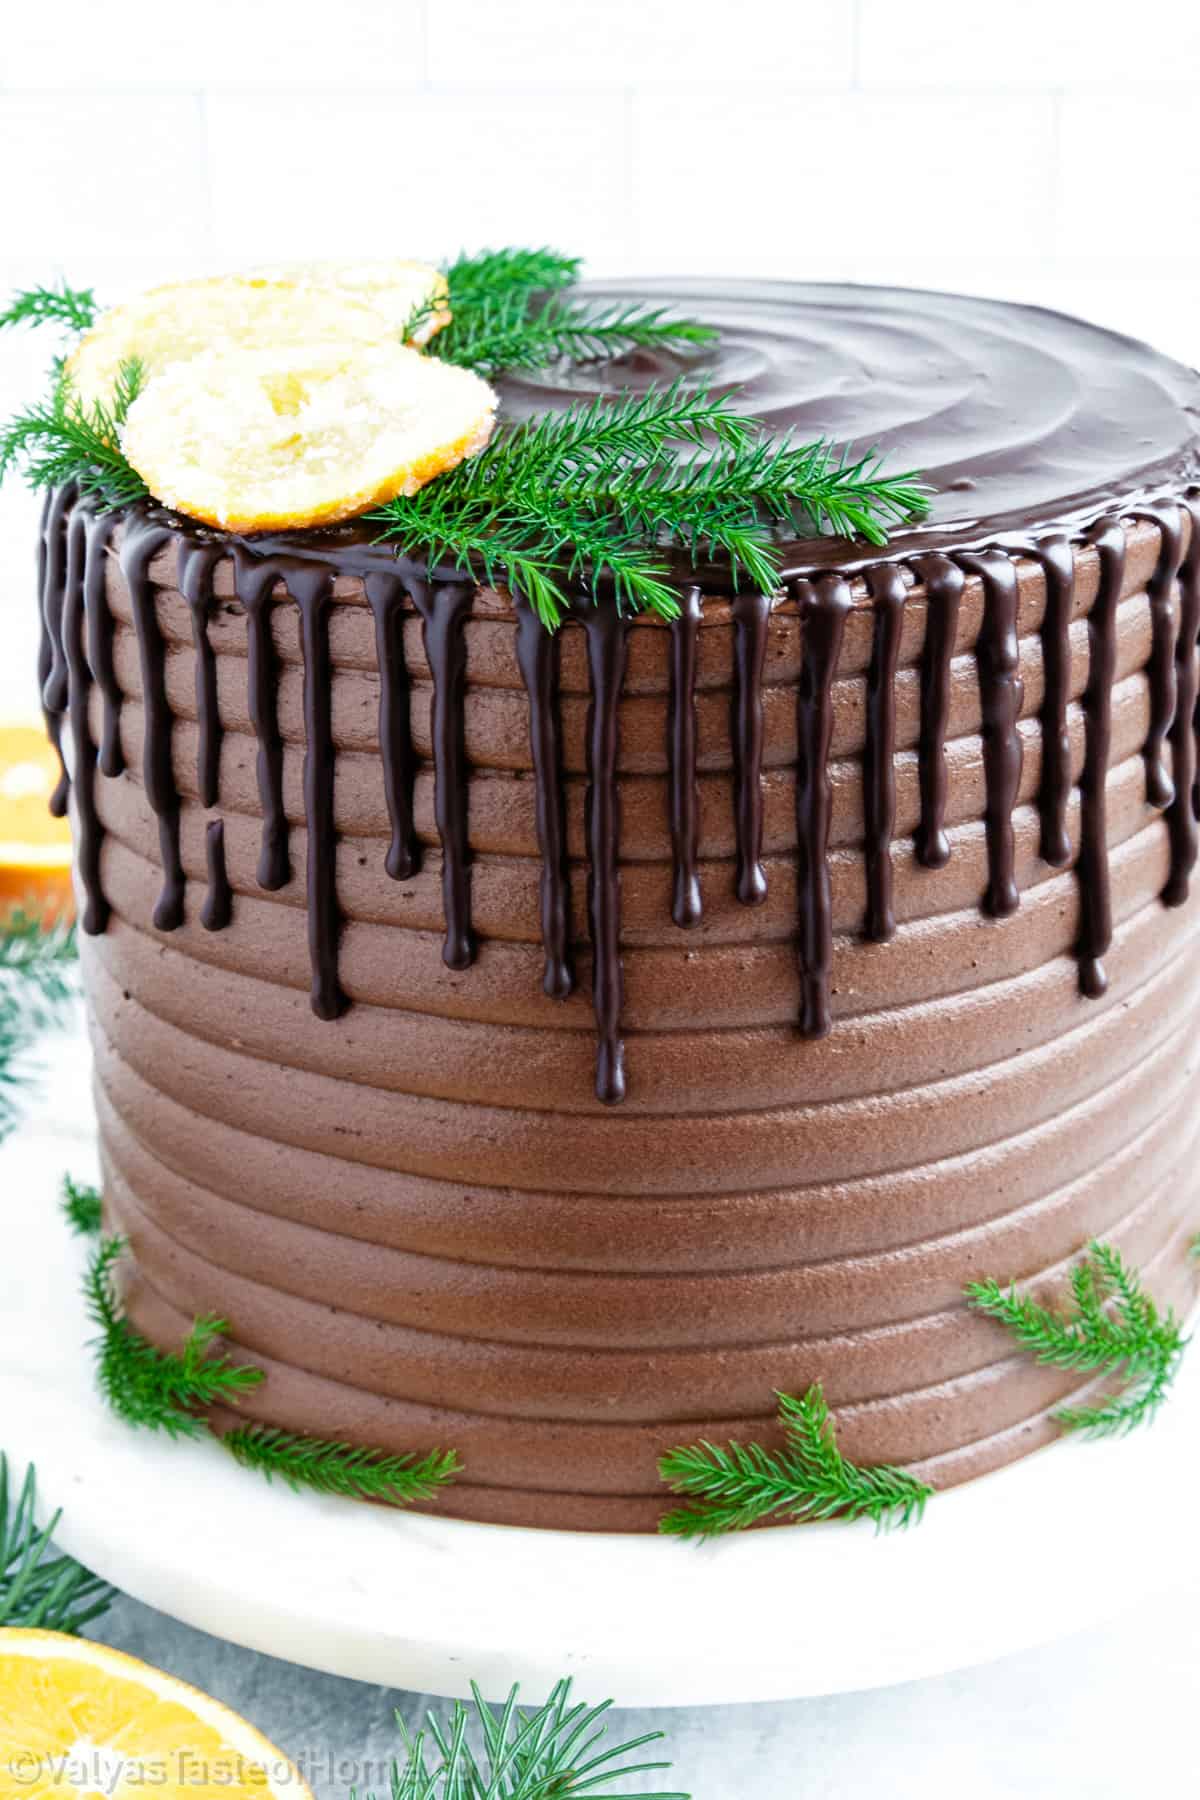 Celebrate Winter Oranges With These 7 Delicious Cakes